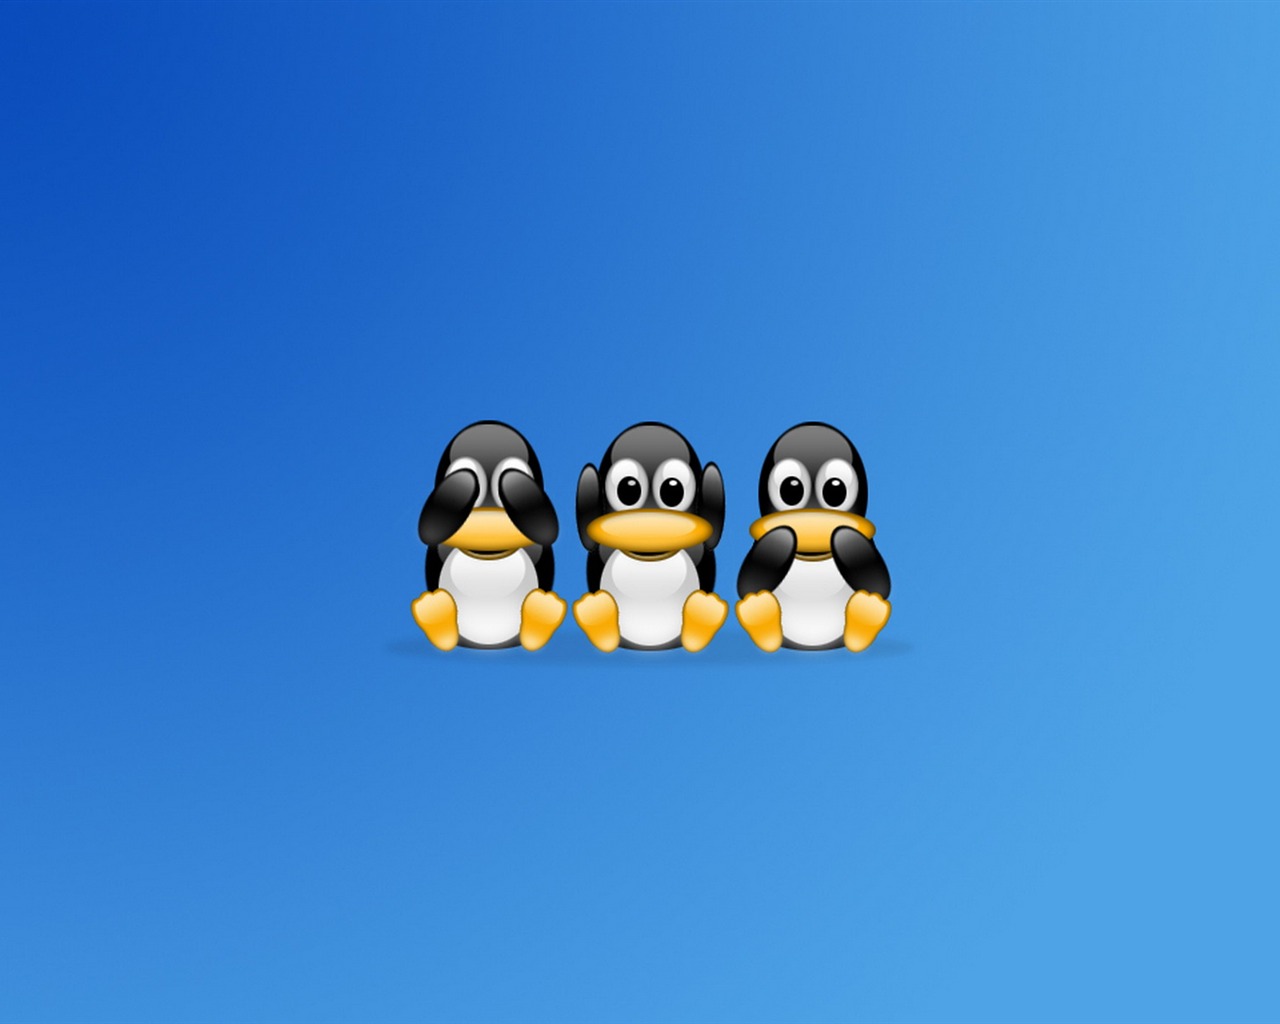 Linux tapety (3) #12 - 1280x1024